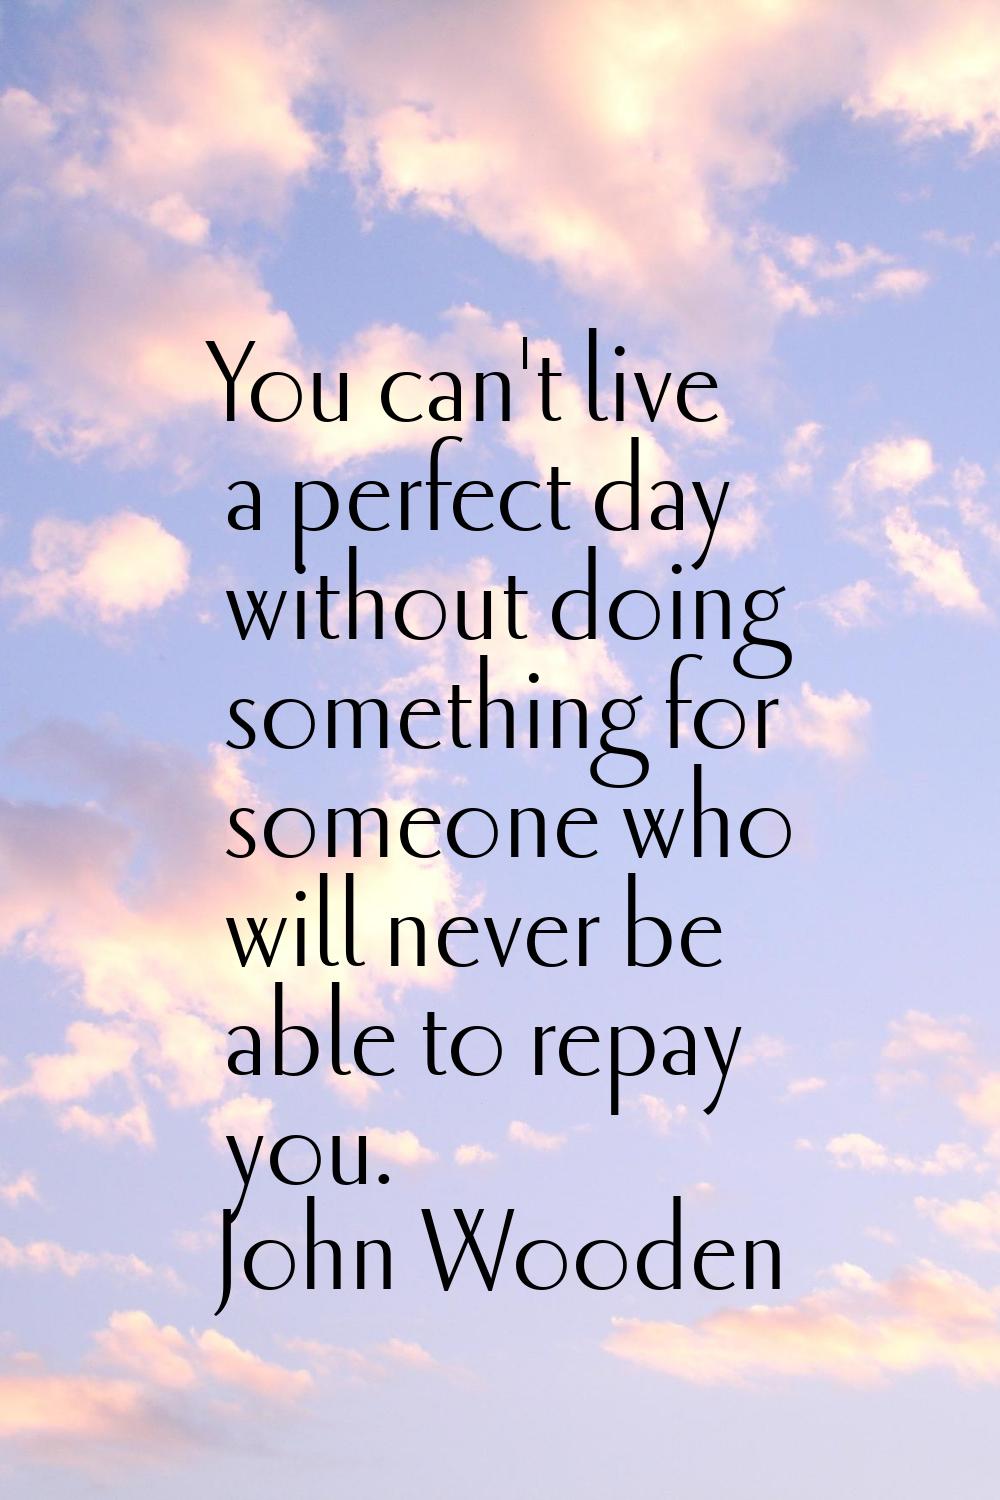 You can't live a perfect day without doing something for someone who will never be able to repay yo